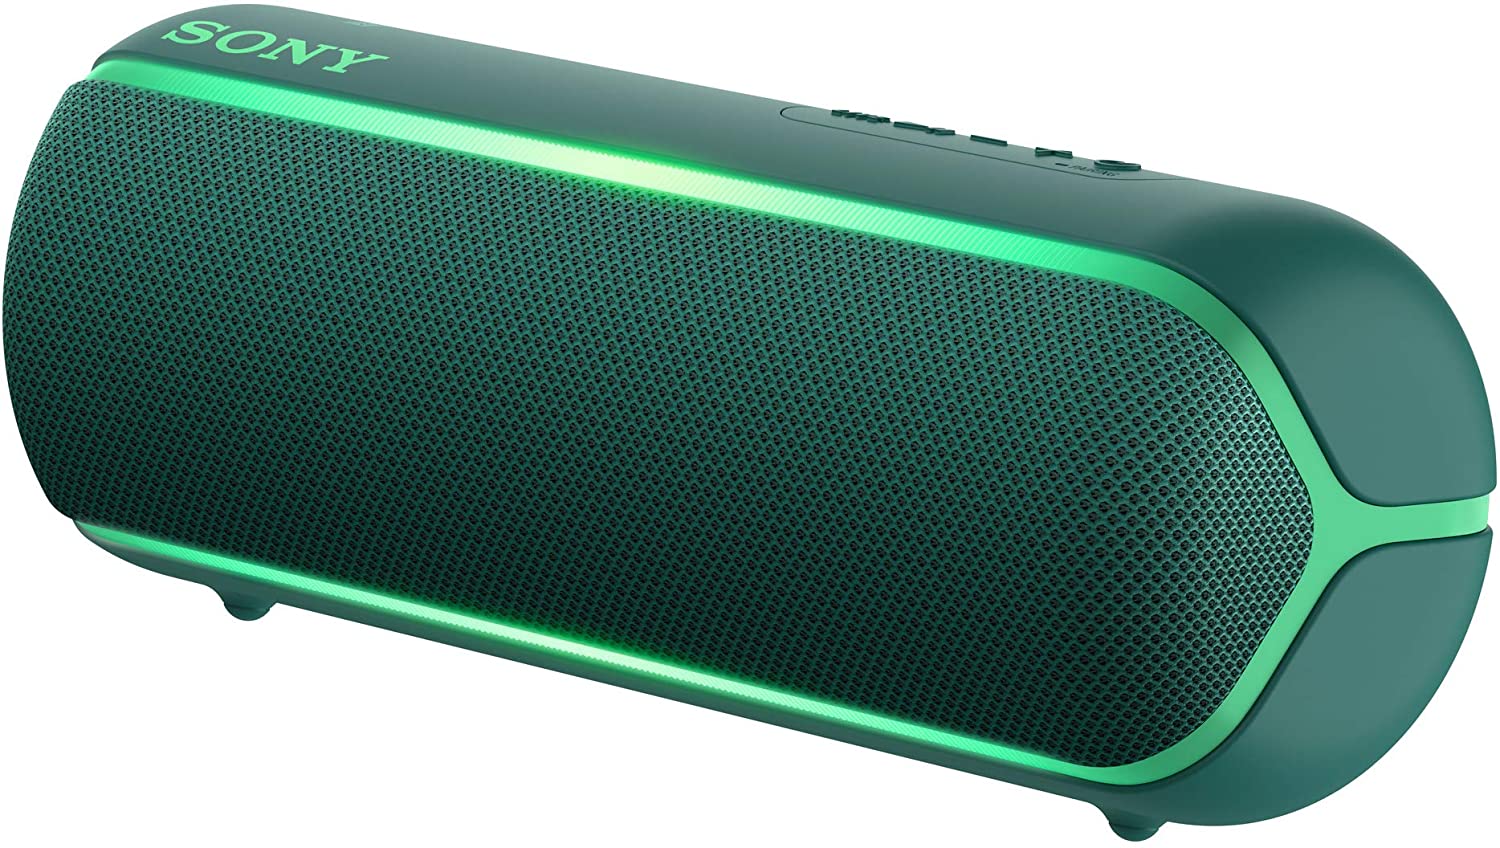 Sony SRS-XB22 Wireless Extra Bass Bluetooth Speaker with 12 Hours Battery Life (Green)